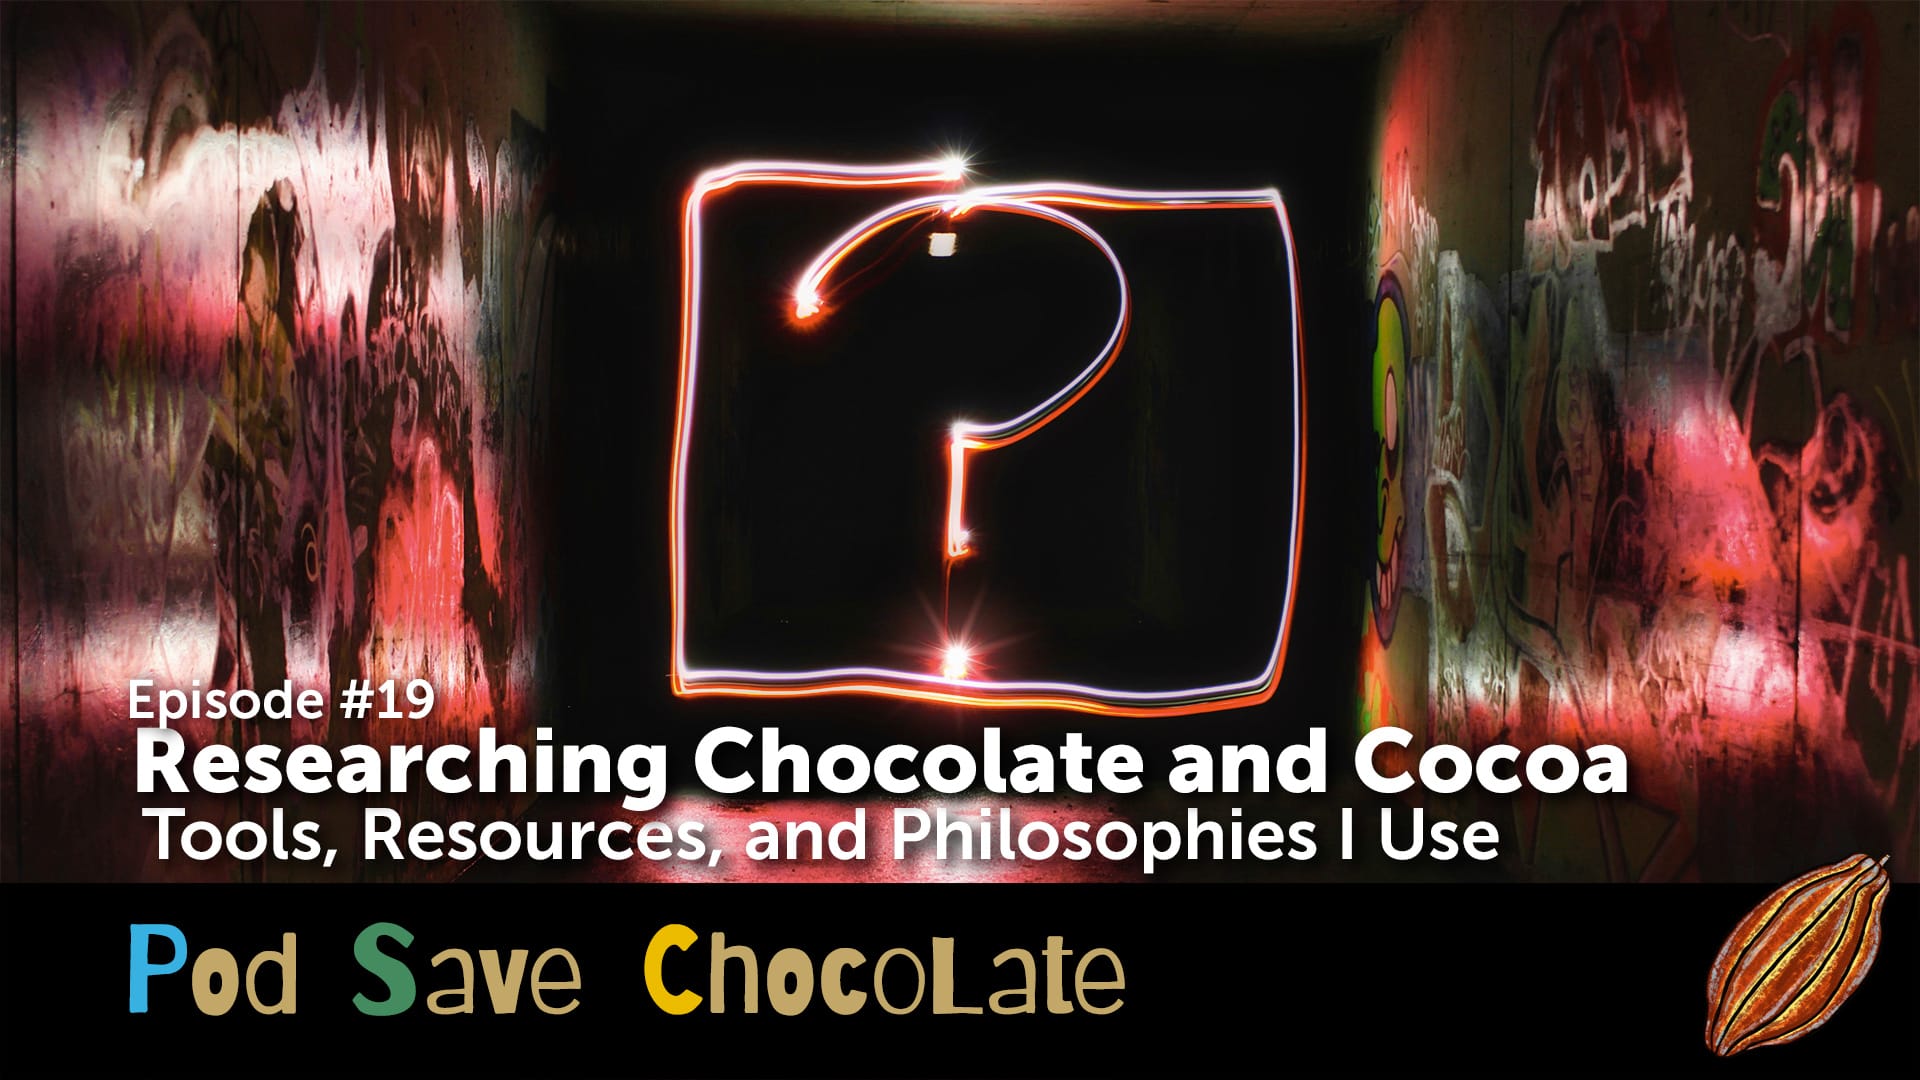 Researching Chocolate and Cocoa on the Interwebs | #PodSaveChocolate